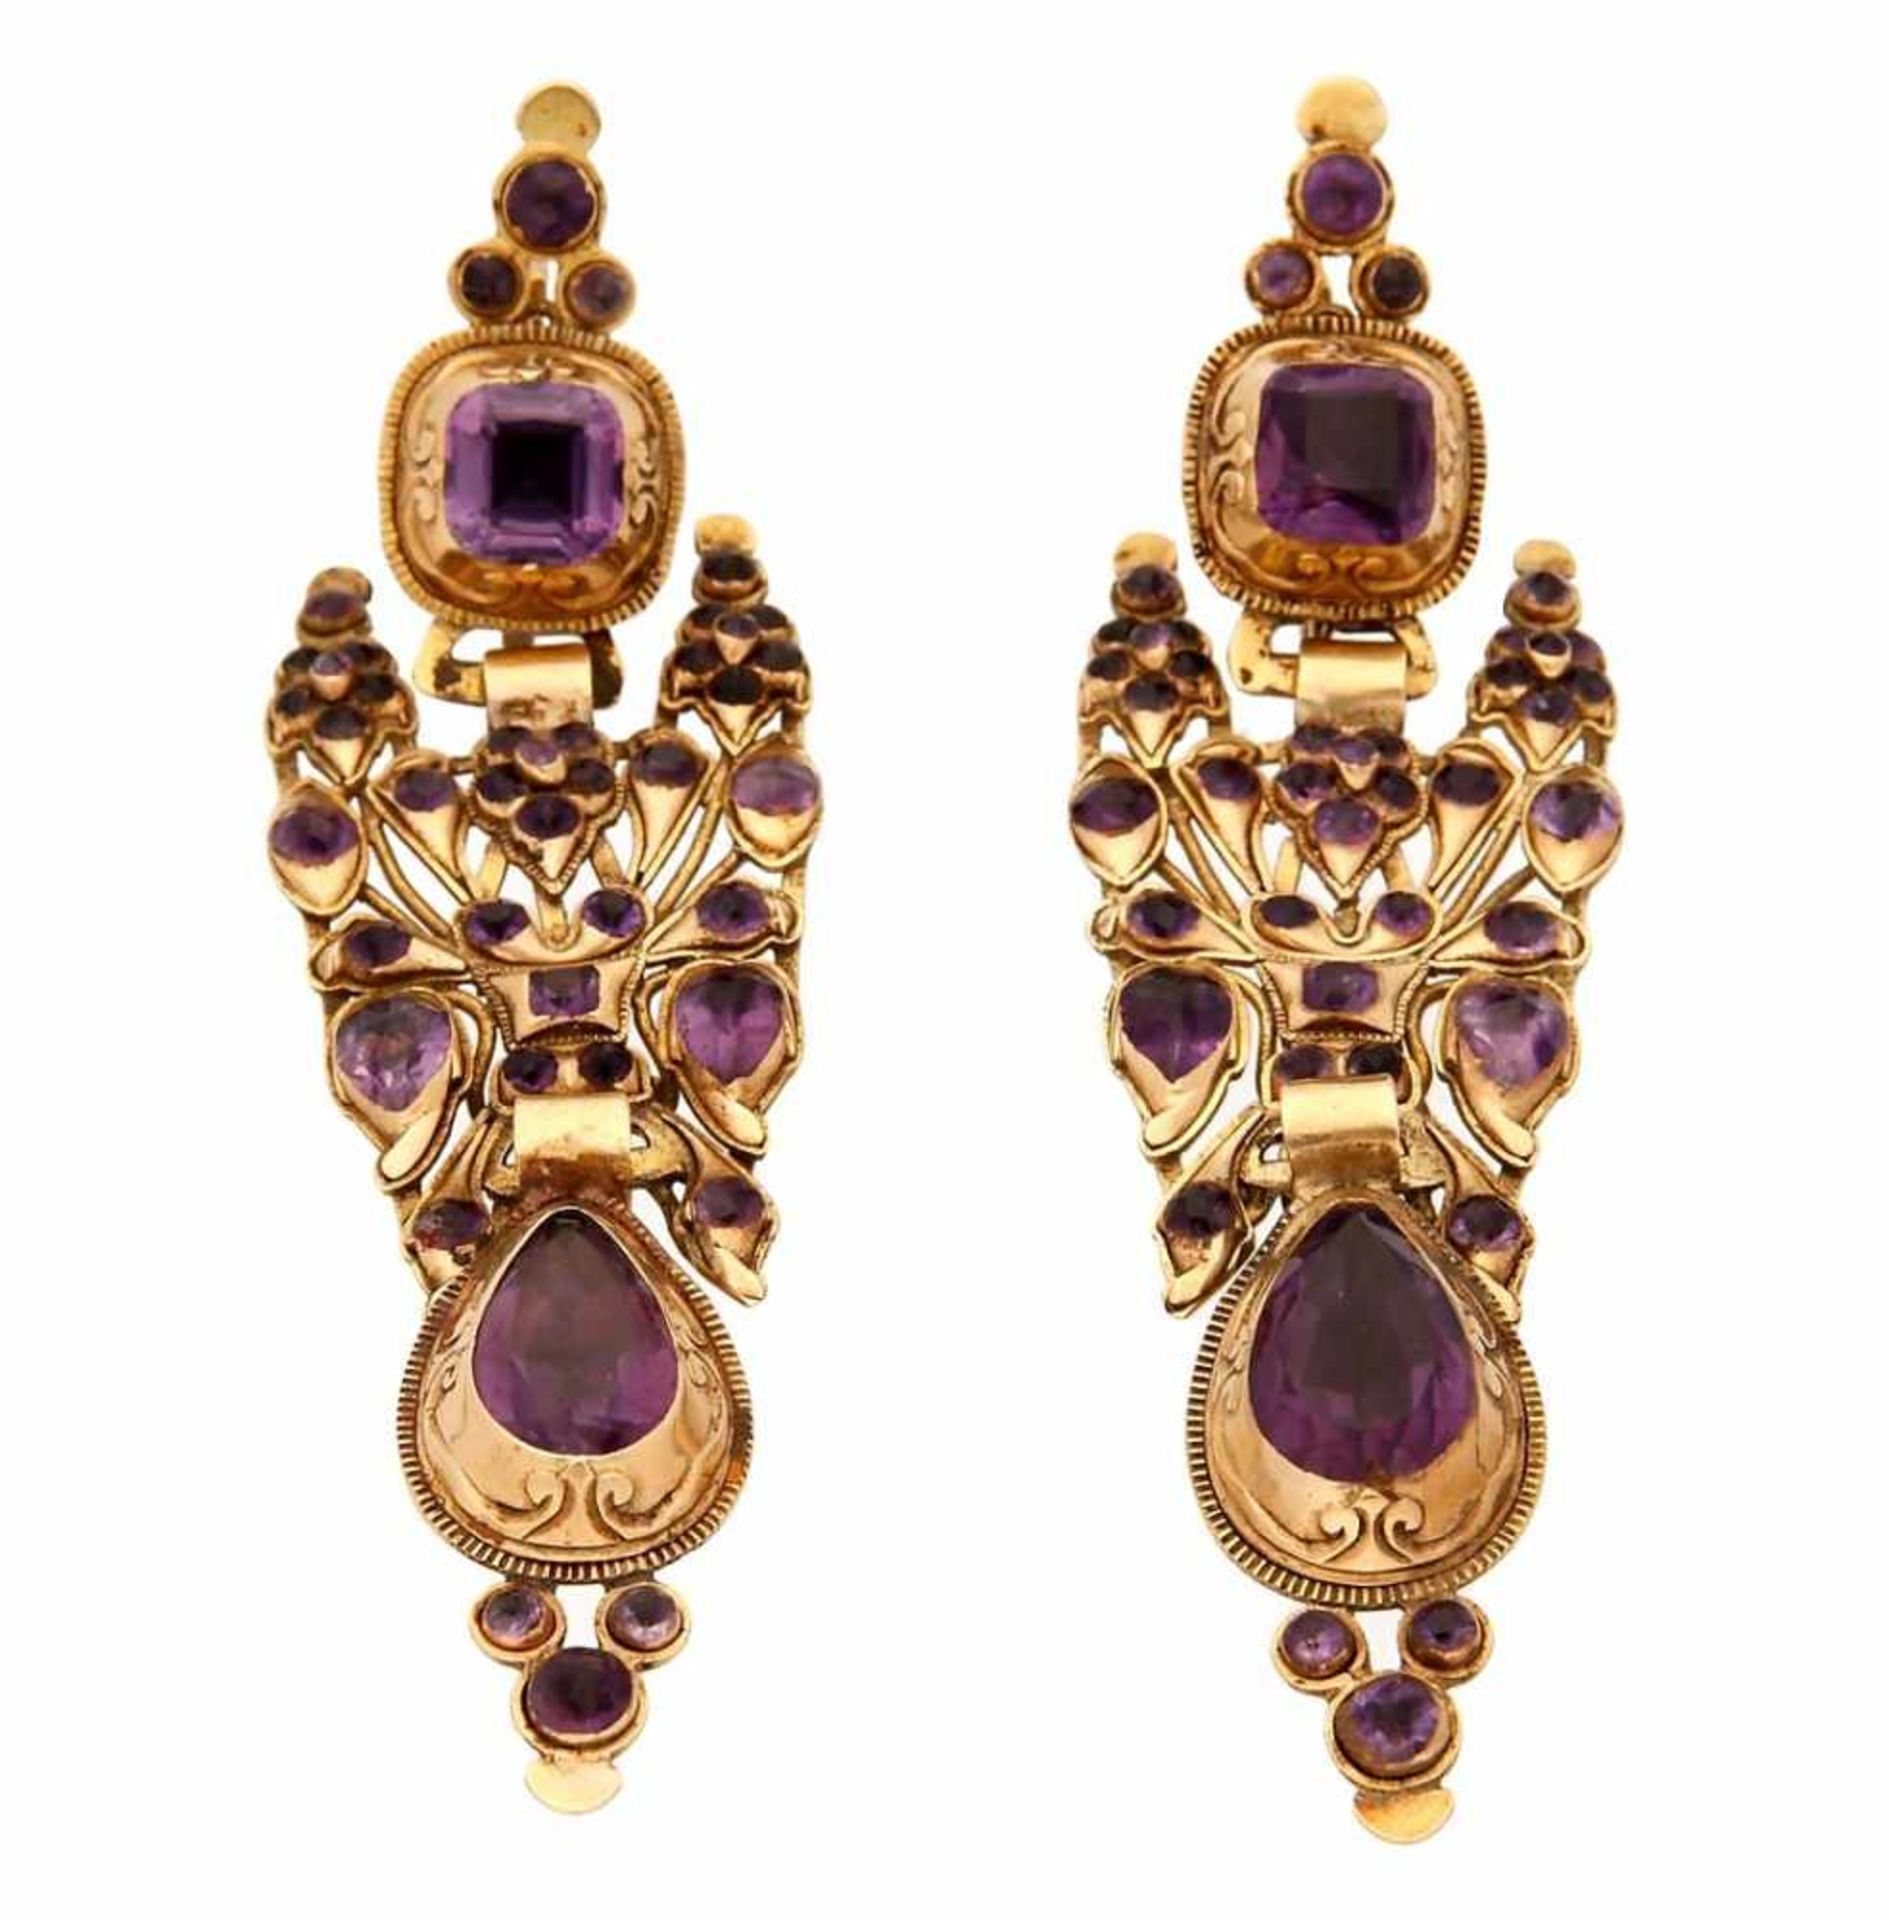 Catalan long earrings in gold and amethysts, 19th Century.Gold and round, square and pear cut